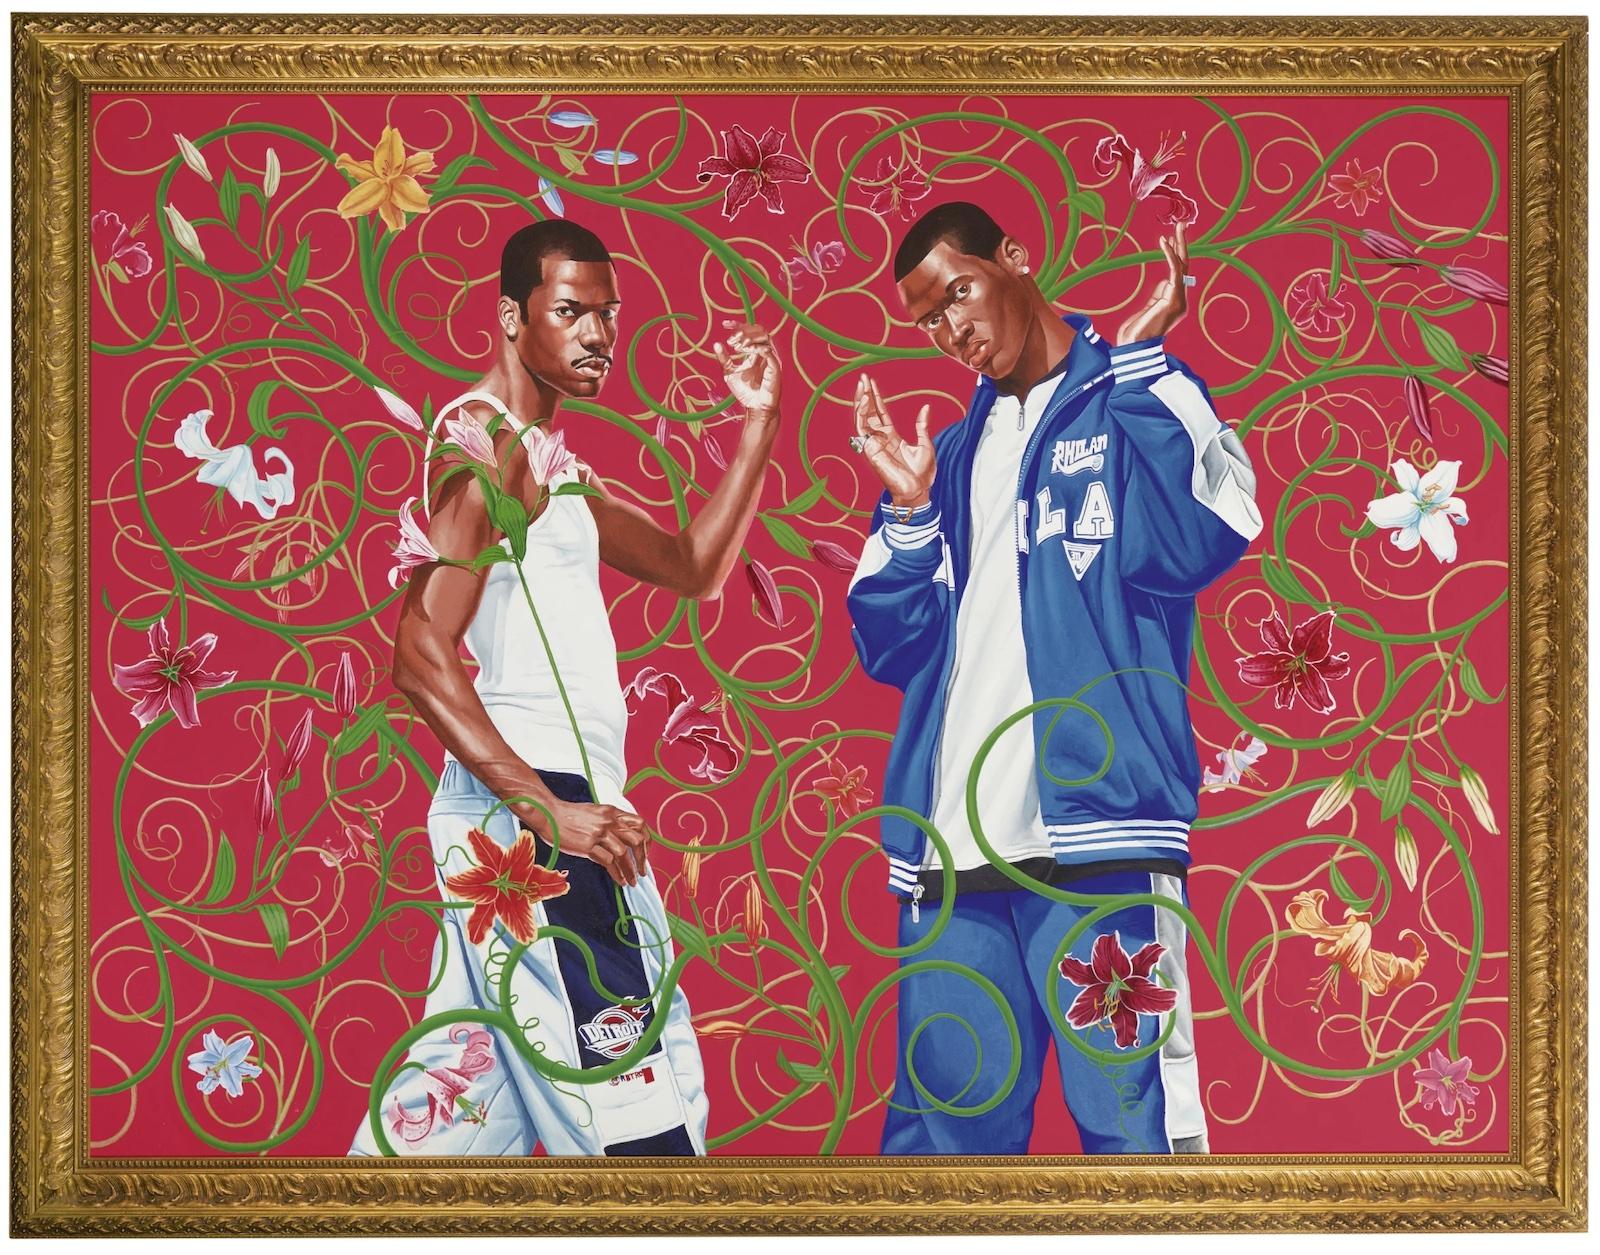 Kehinde Wiley Passing/Posing Annunciation signed, titled and dated 05 on the reverse acrylic on canvas, in artist's frame 81 1/4 by 106 1/8 in. 206.4 by 269.6 cm.